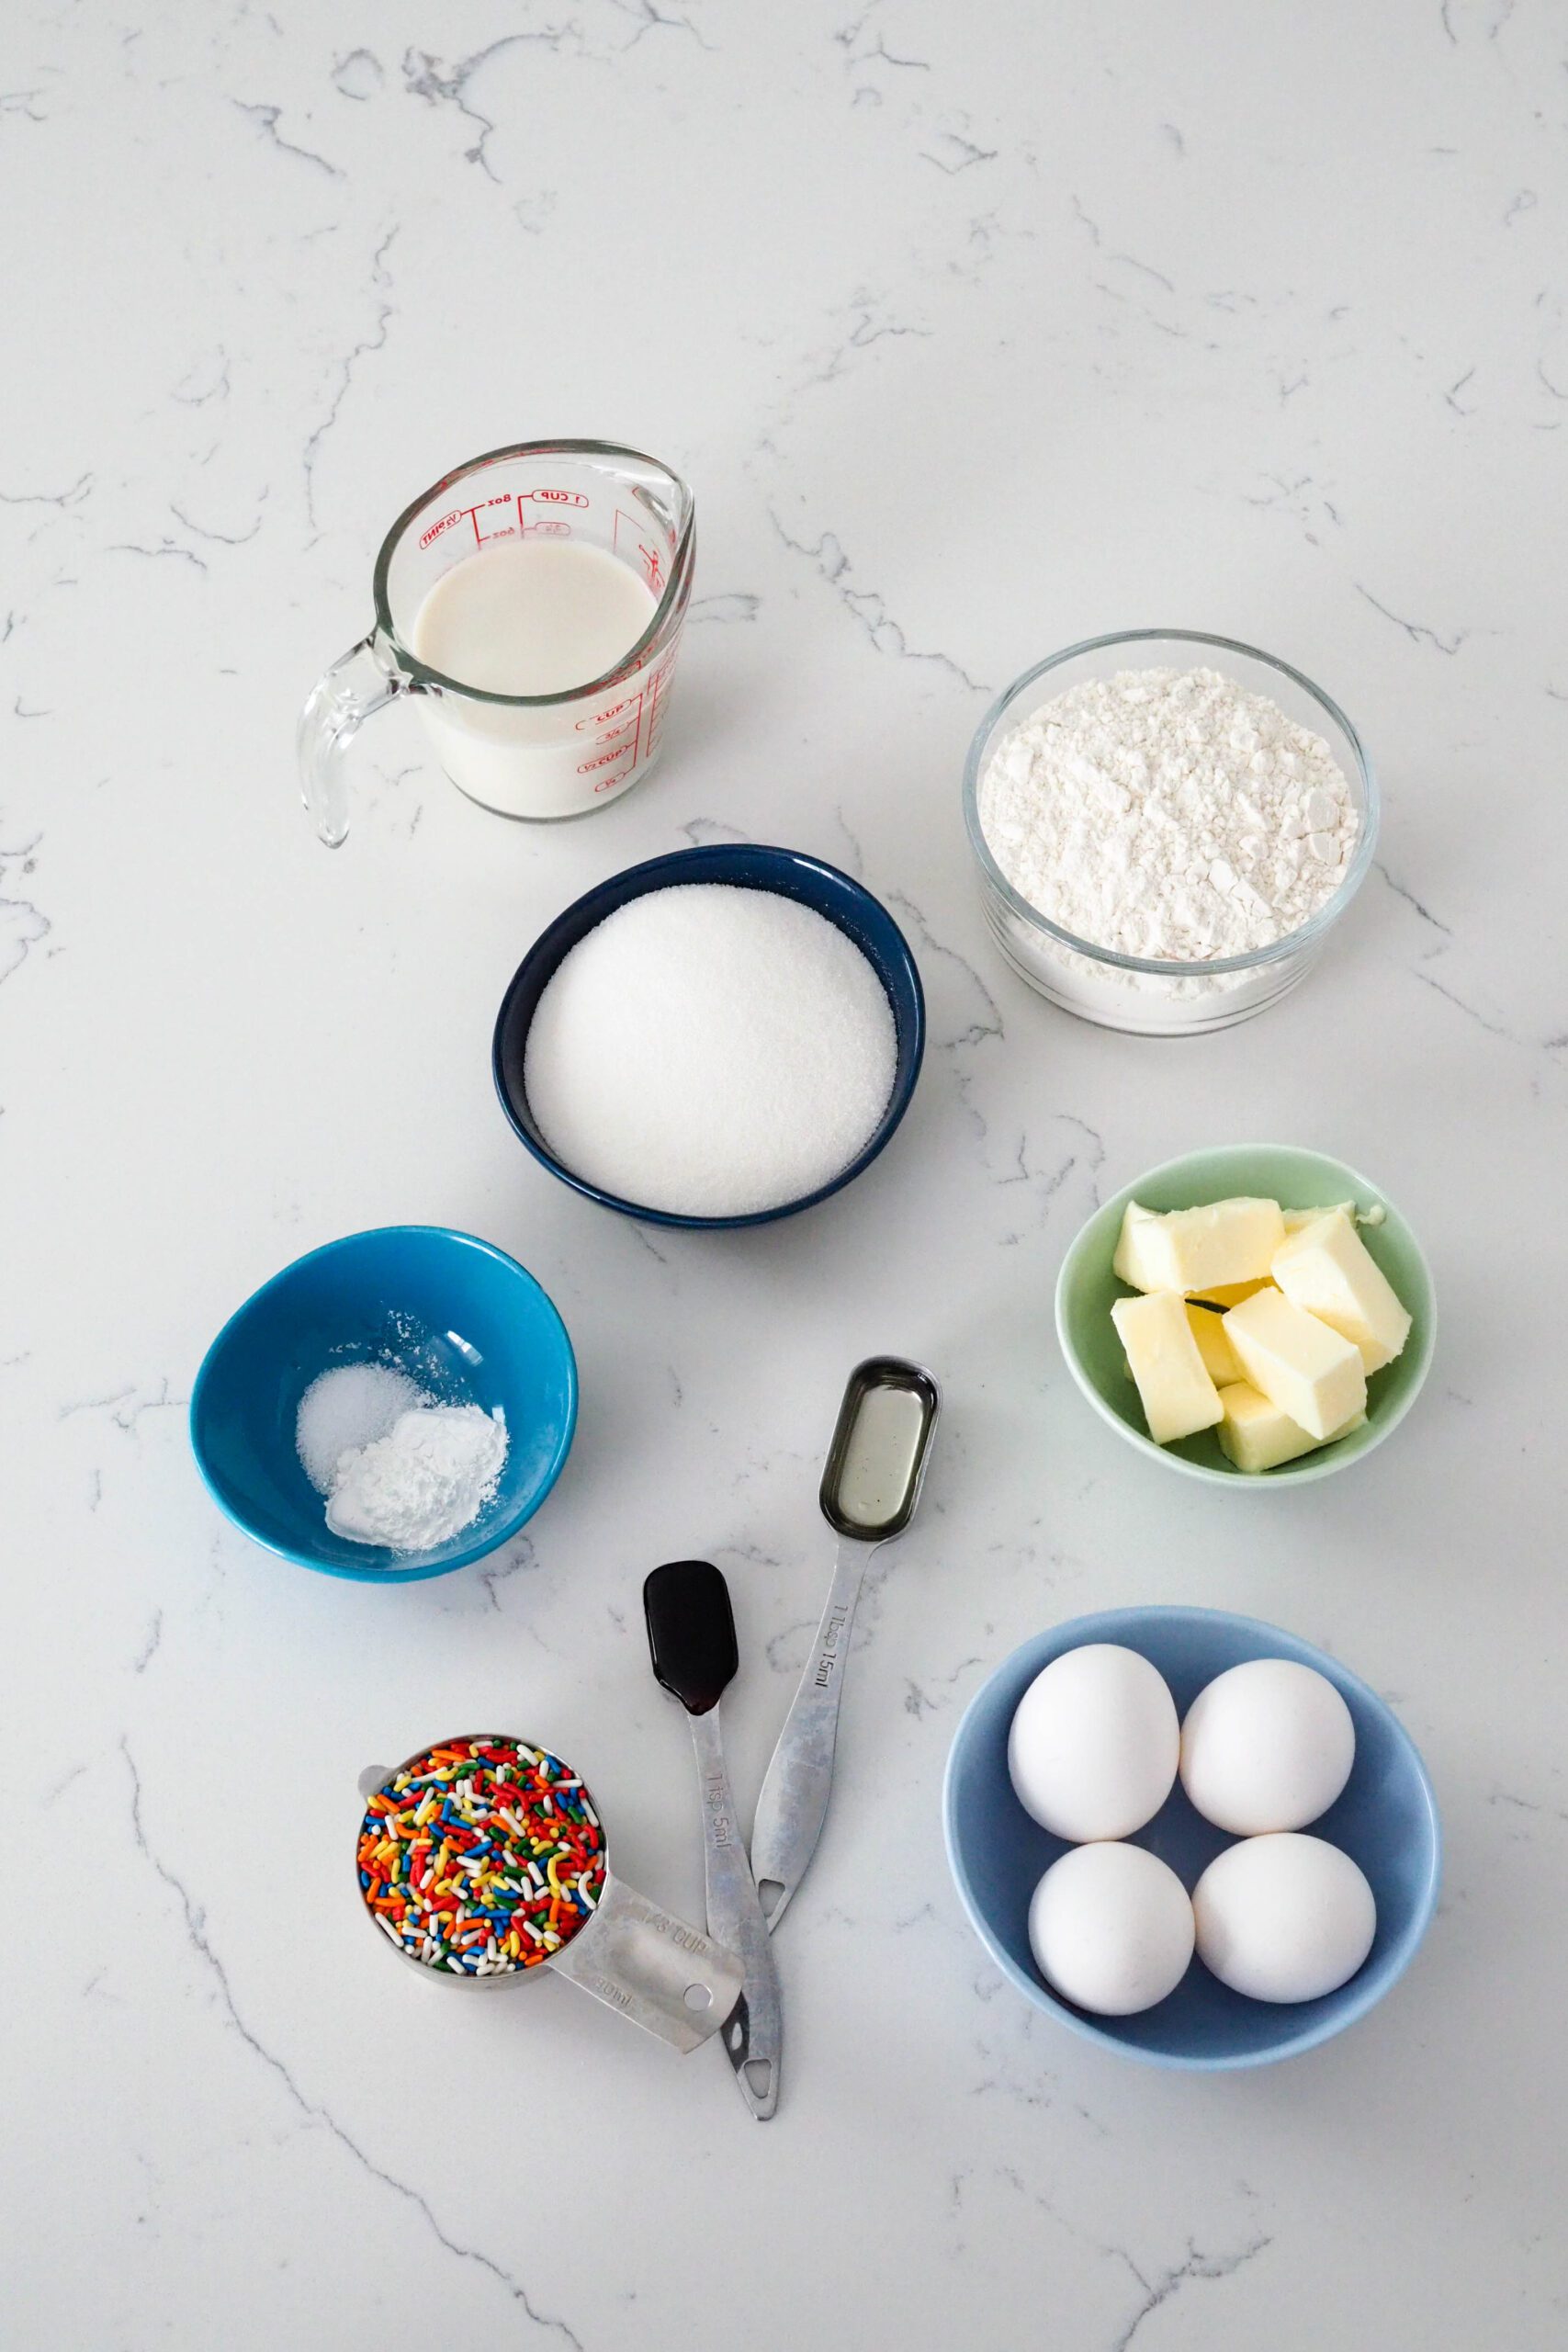 Ingredients needed to make the white sprinkle cakes.